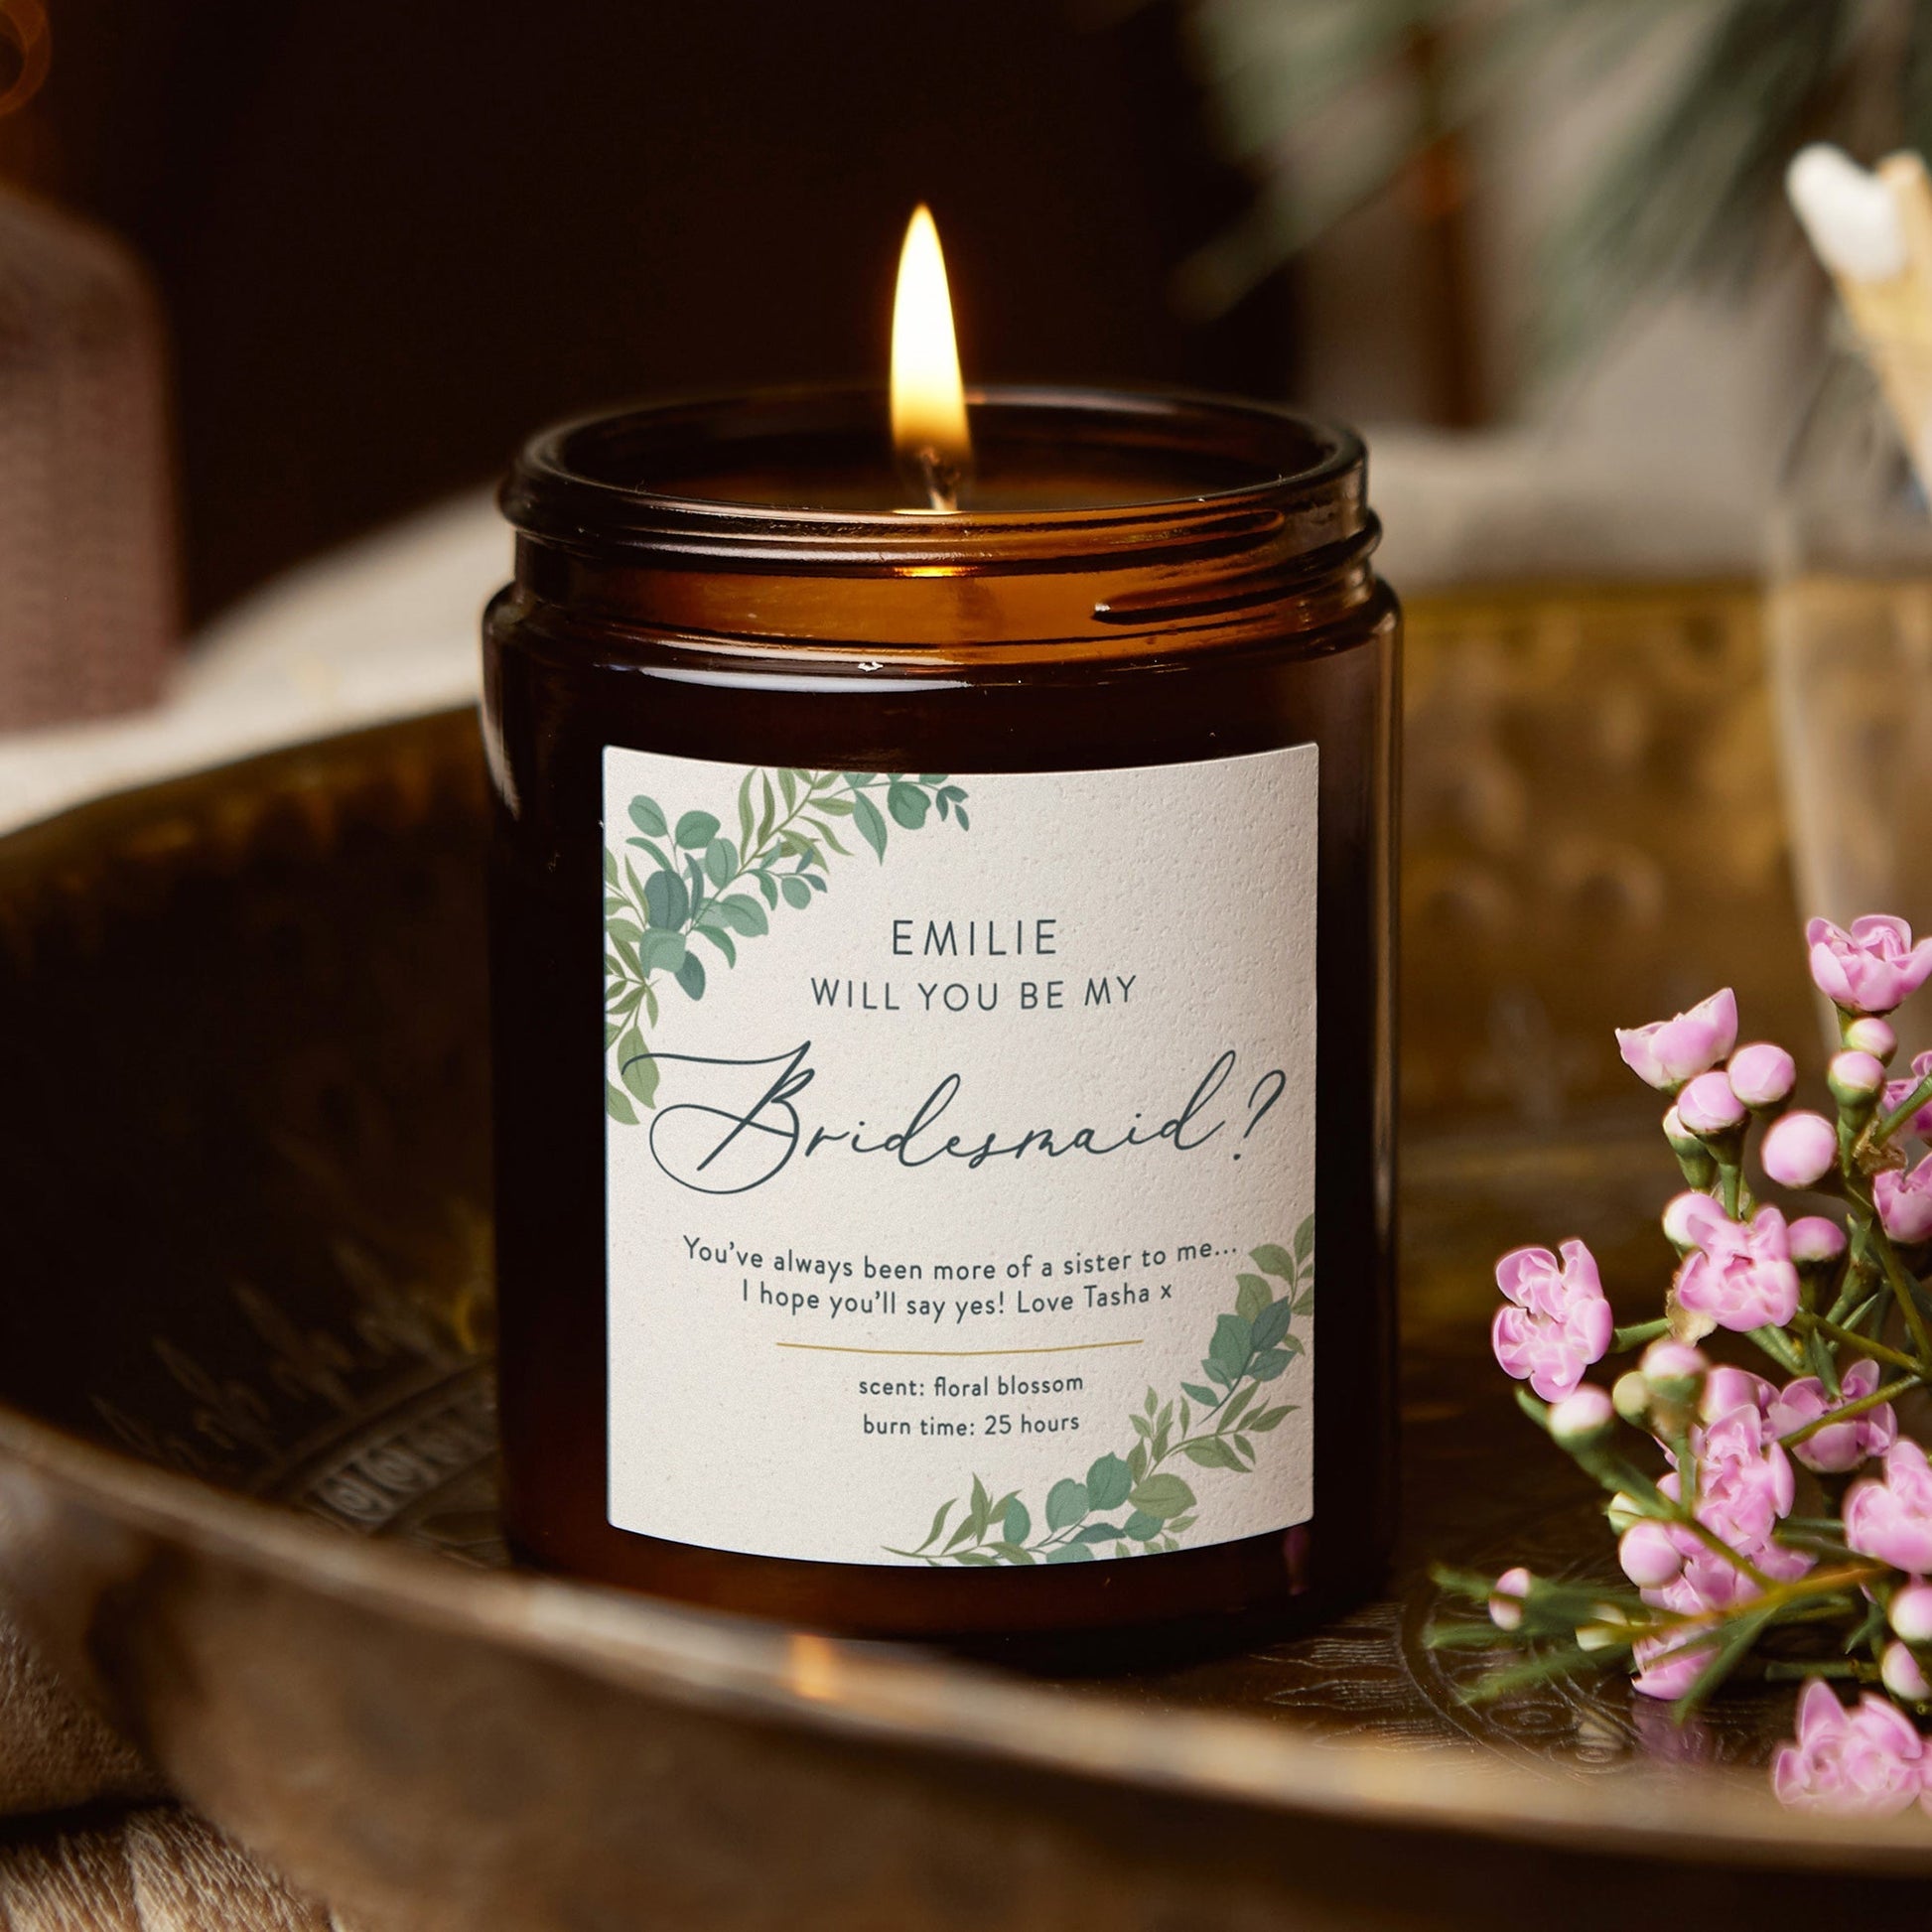 Be My Bridesmaid Botanical Candle - Kindred Fires